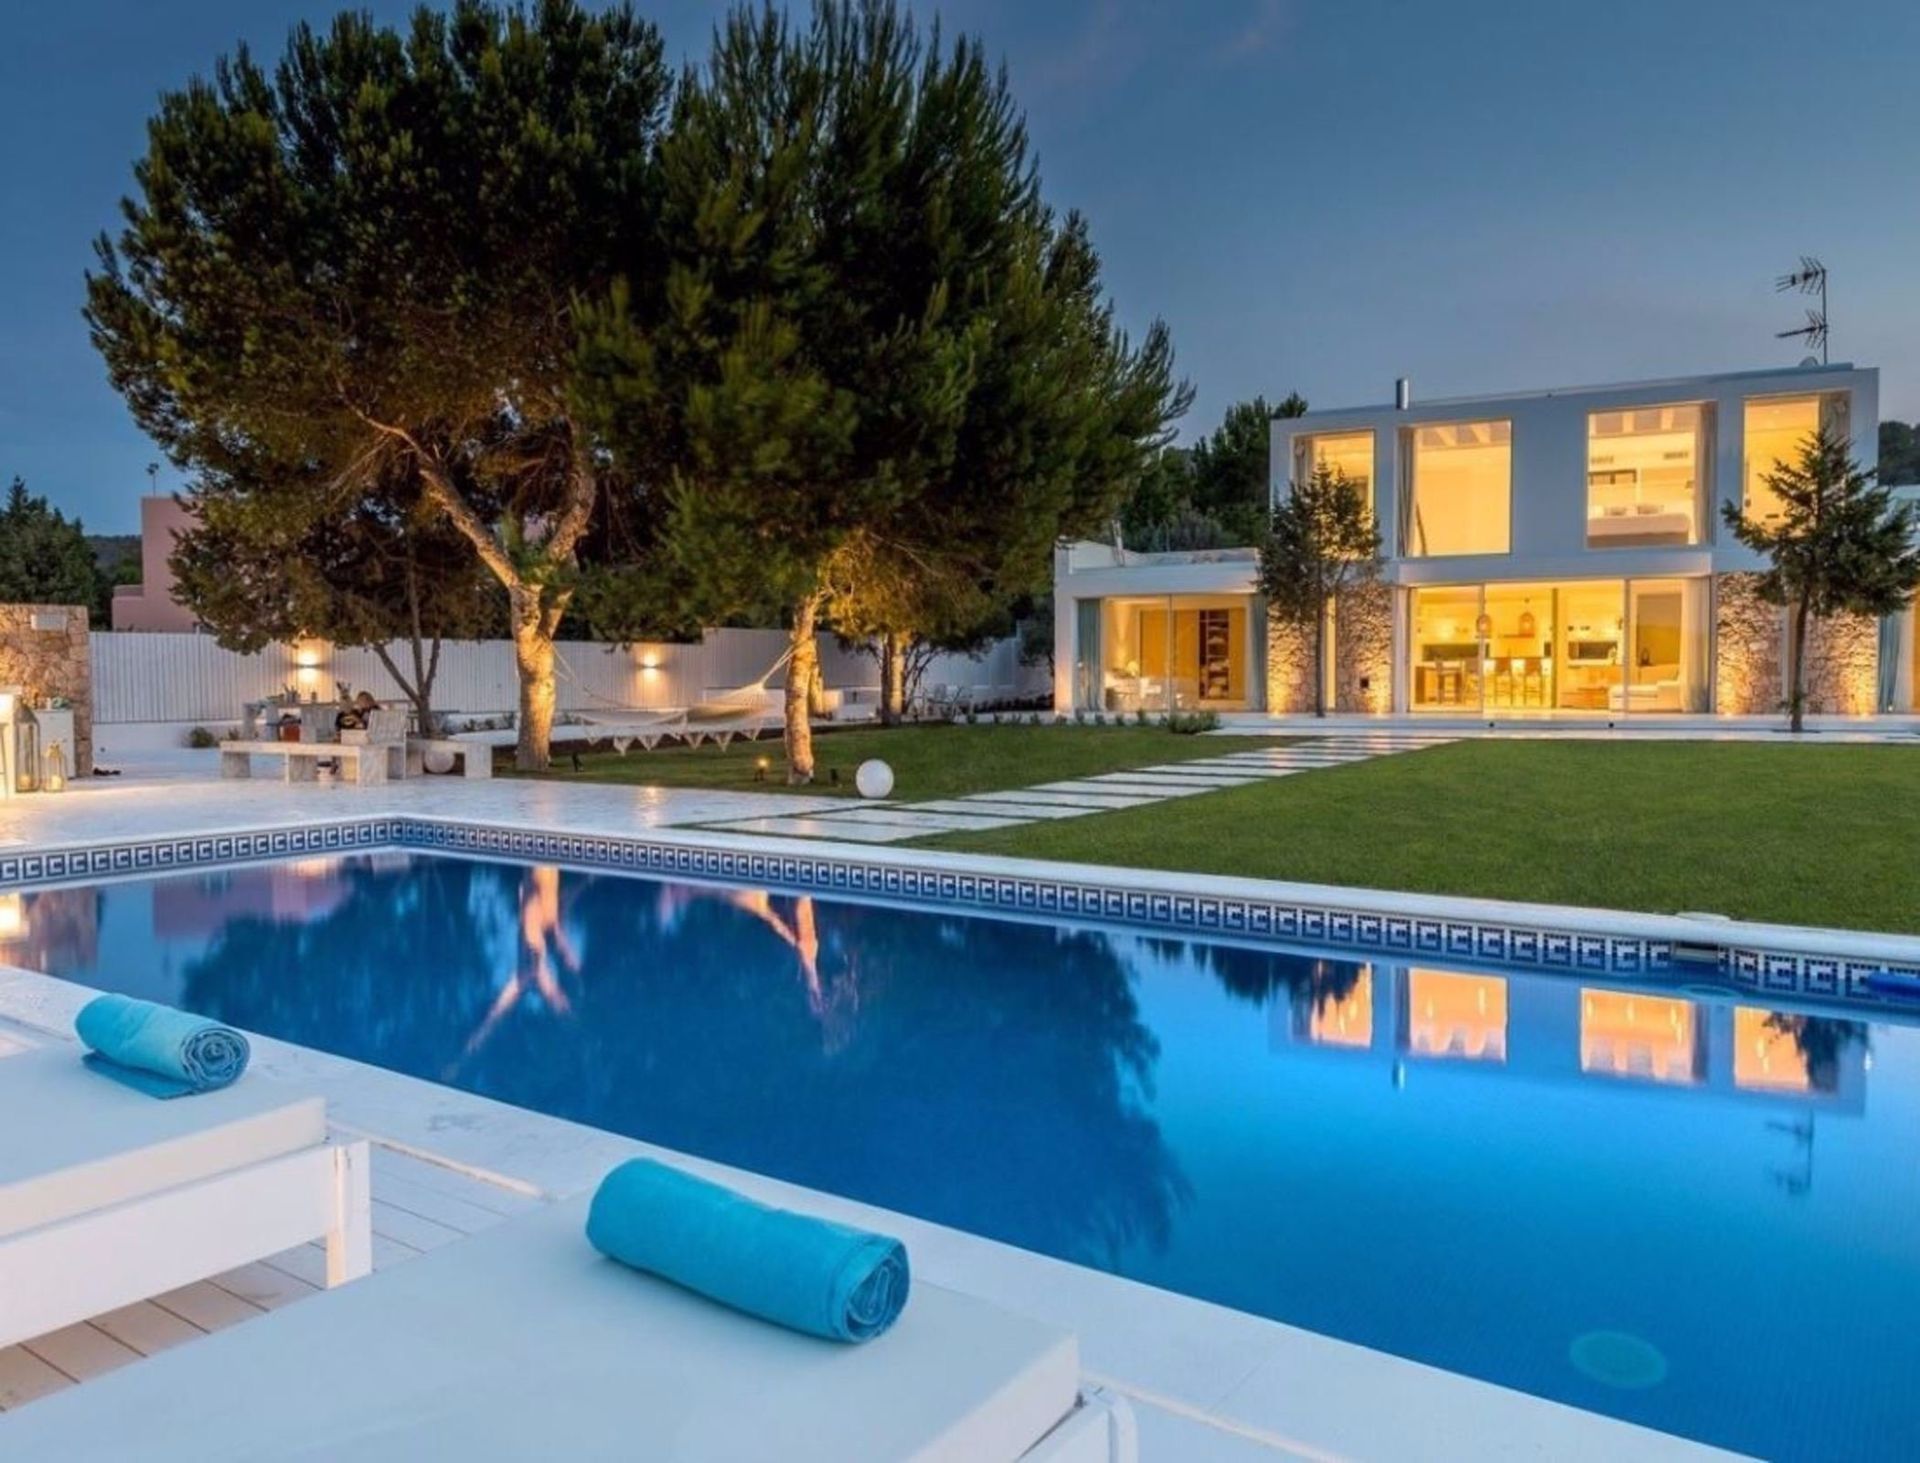 A luxury five bedroom apartment in Ibiza